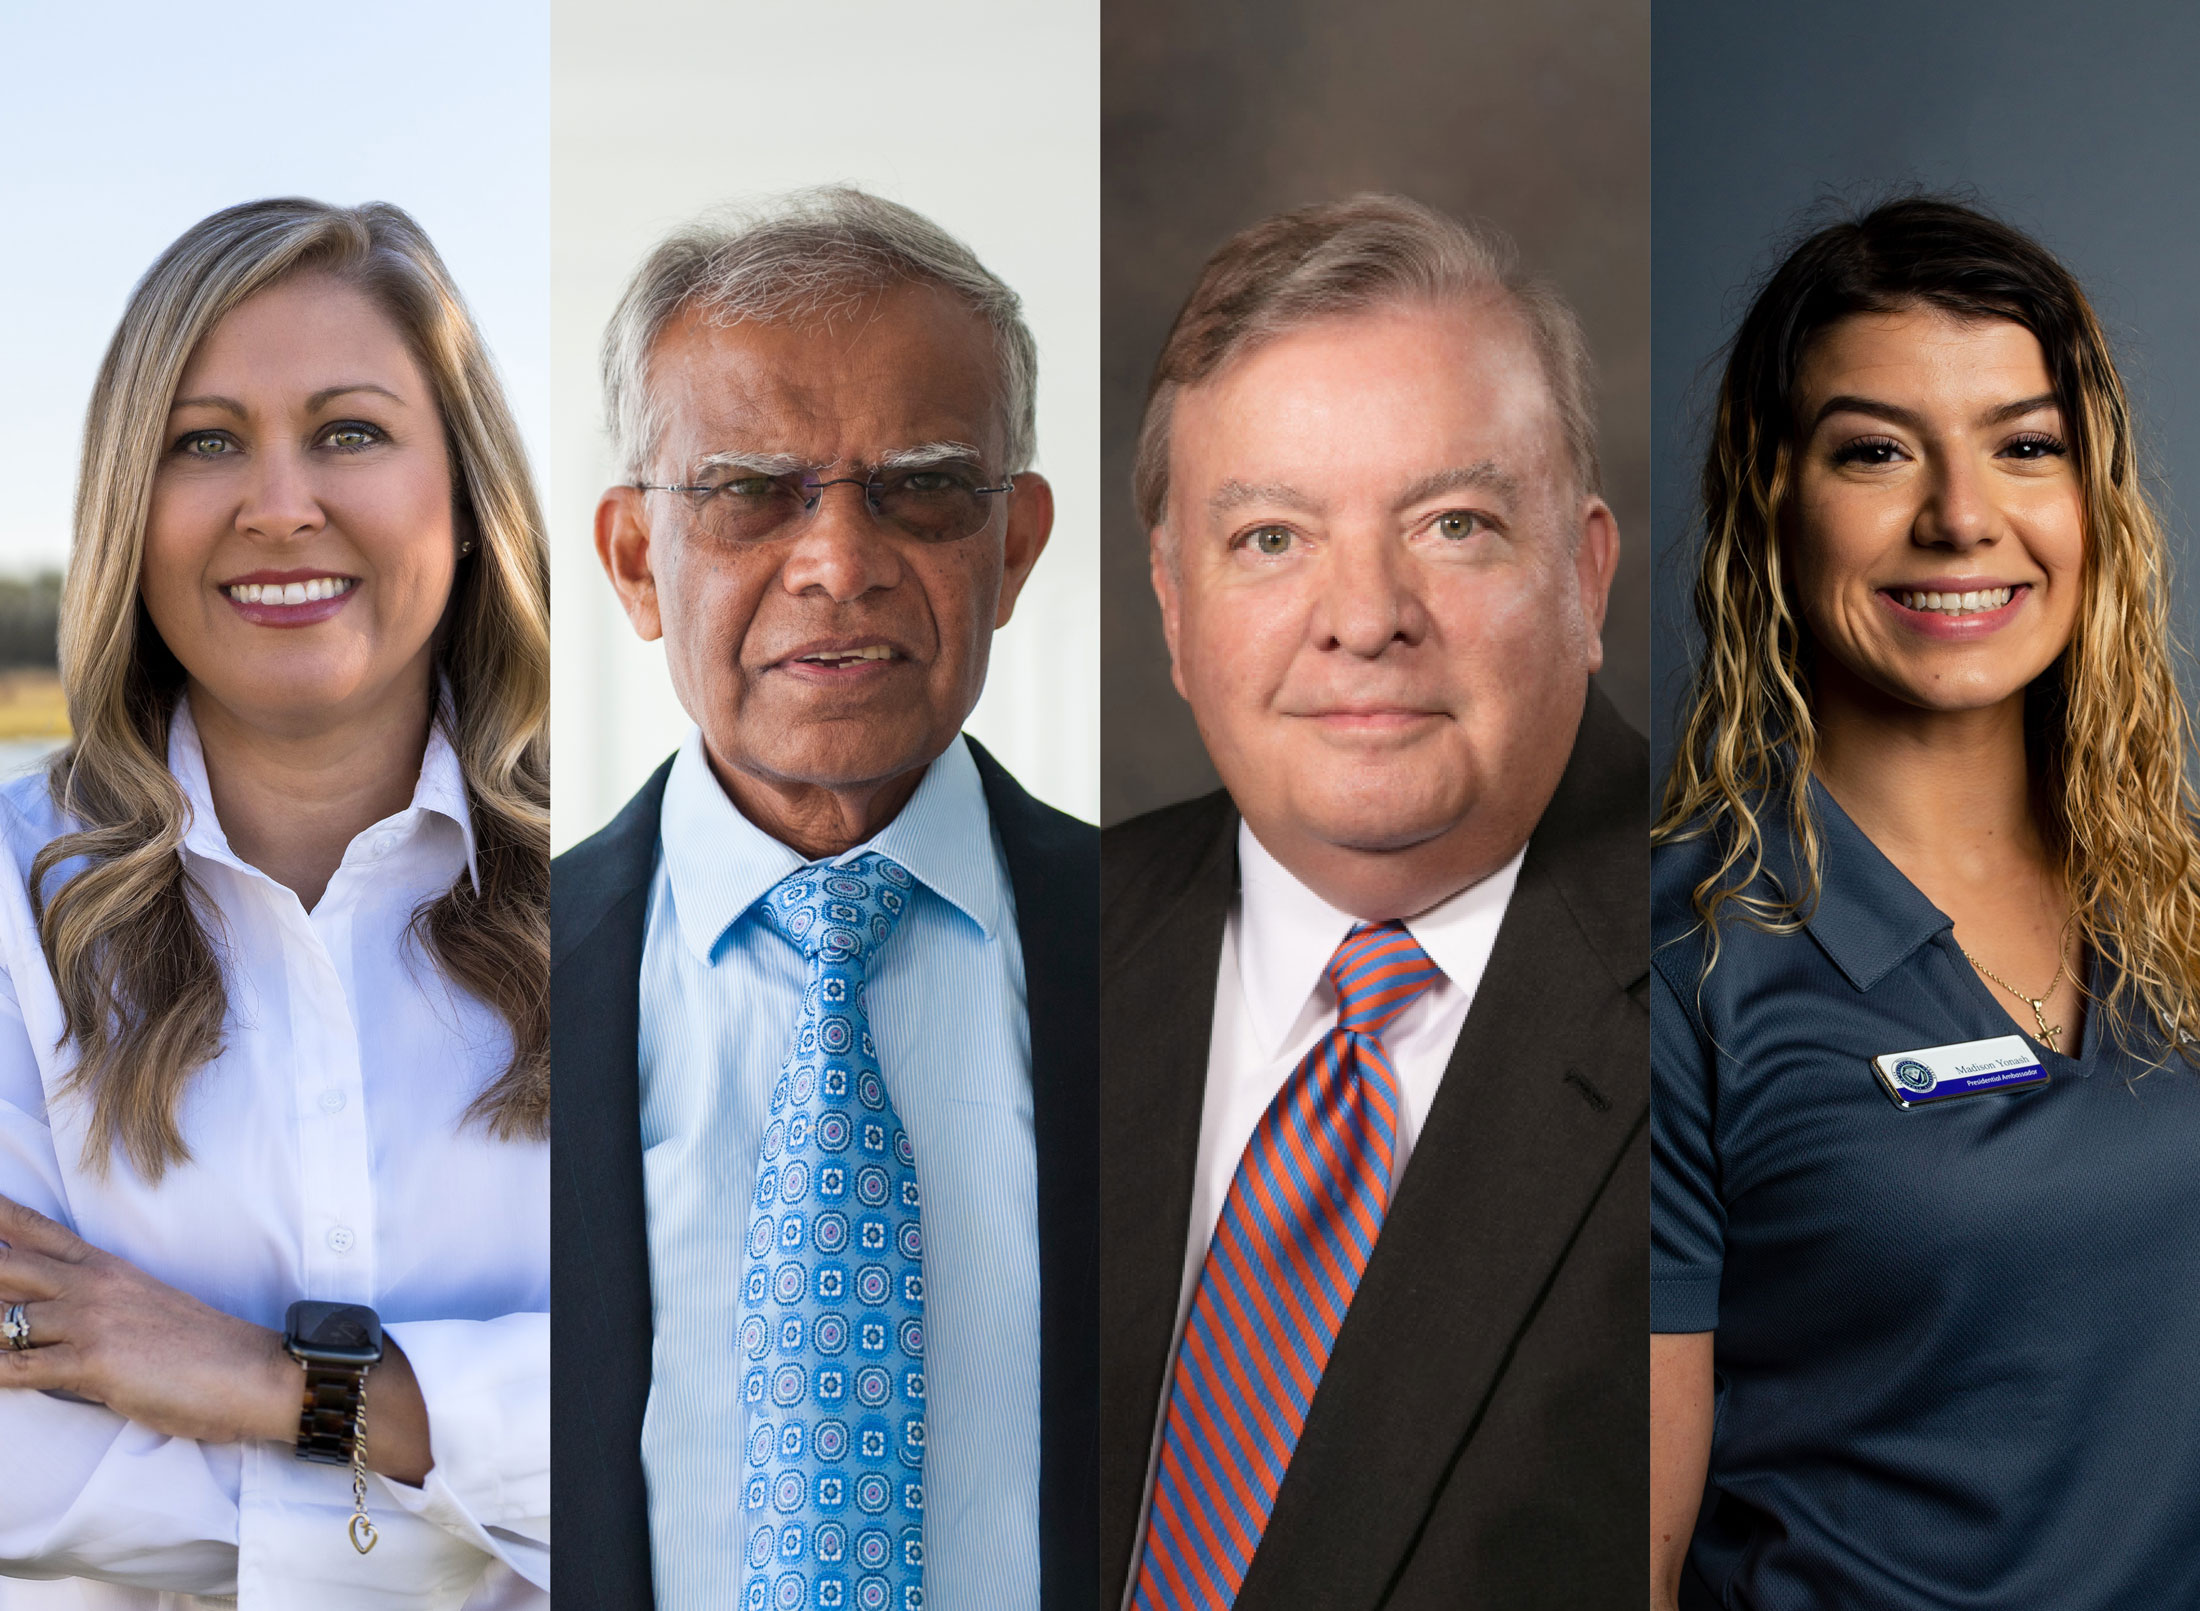 Kristen Lowers, Dr. Muhammad Rashid, Don Wilson, and Madison Yonash are the newest members of the Florida Polytechnic University Foundation Board of Directors.